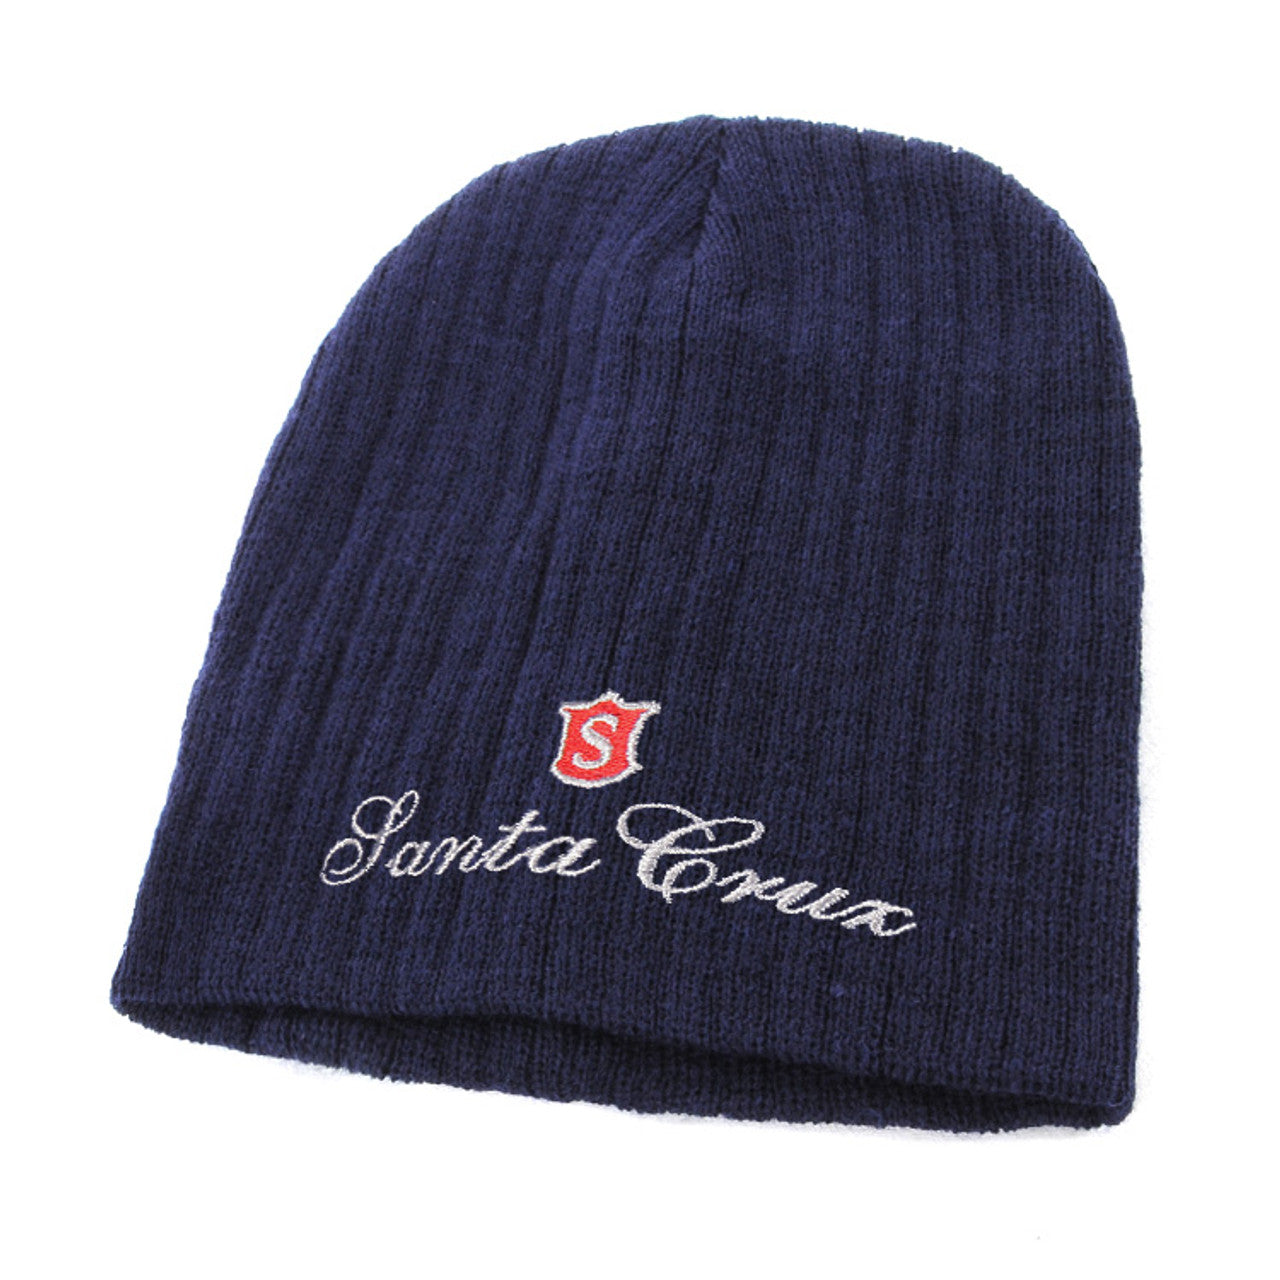 Grace collection AH742 100% Wool Beanie-Navy